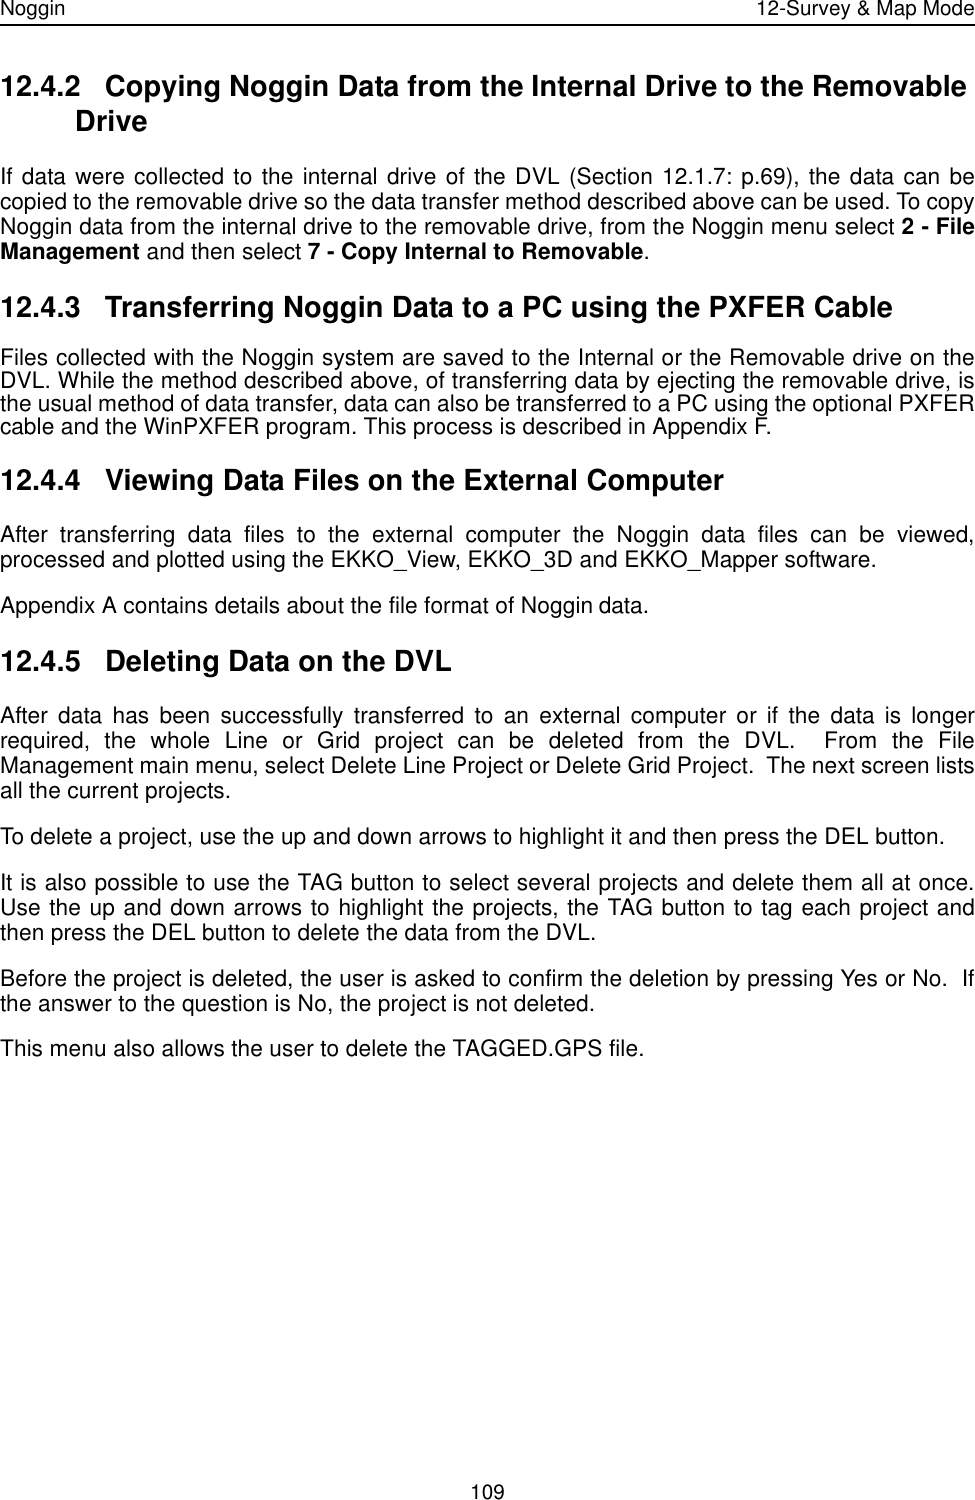 Noggin 12-Survey &amp; Map Mode10912.4.2 Copying Noggin Data from the Internal Drive to the Removable DriveIf data were collected to the internal drive of the DVL (Section 12.1.7: p.69), the data can becopied to the removable drive so the data transfer method described above can be used. To copyNoggin data from the internal drive to the removable drive, from the Noggin menu select 2 - FileManagement and then select 7 - Copy Internal to Removable.12.4.3 Transferring Noggin Data to a PC using the PXFER CableFiles collected with the Noggin system are saved to the Internal or the Removable drive on theDVL. While the method described above, of transferring data by ejecting the removable drive, isthe usual method of data transfer, data can also be transferred to a PC using the optional PXFERcable and the WinPXFER program. This process is described in Appendix F.12.4.4 Viewing Data Files on the External ComputerAfter transferring data files to the external computer the Noggin data files can be viewed,processed and plotted using the EKKO_View, EKKO_3D and EKKO_Mapper software.Appendix A contains details about the file format of Noggin data. 12.4.5 Deleting Data on the DVLAfter data has been successfully transferred to an external computer or if the data is longerrequired, the whole Line or Grid project can be deleted from the DVL.  From the FileManagement main menu, select Delete Line Project or Delete Grid Project.  The next screen listsall the current projects. To delete a project, use the up and down arrows to highlight it and then press the DEL button.It is also possible to use the TAG button to select several projects and delete them all at once.Use the up and down arrows to highlight the projects, the TAG button to tag each project andthen press the DEL button to delete the data from the DVL.Before the project is deleted, the user is asked to confirm the deletion by pressing Yes or No.  Ifthe answer to the question is No, the project is not deleted.This menu also allows the user to delete the TAGGED.GPS file.